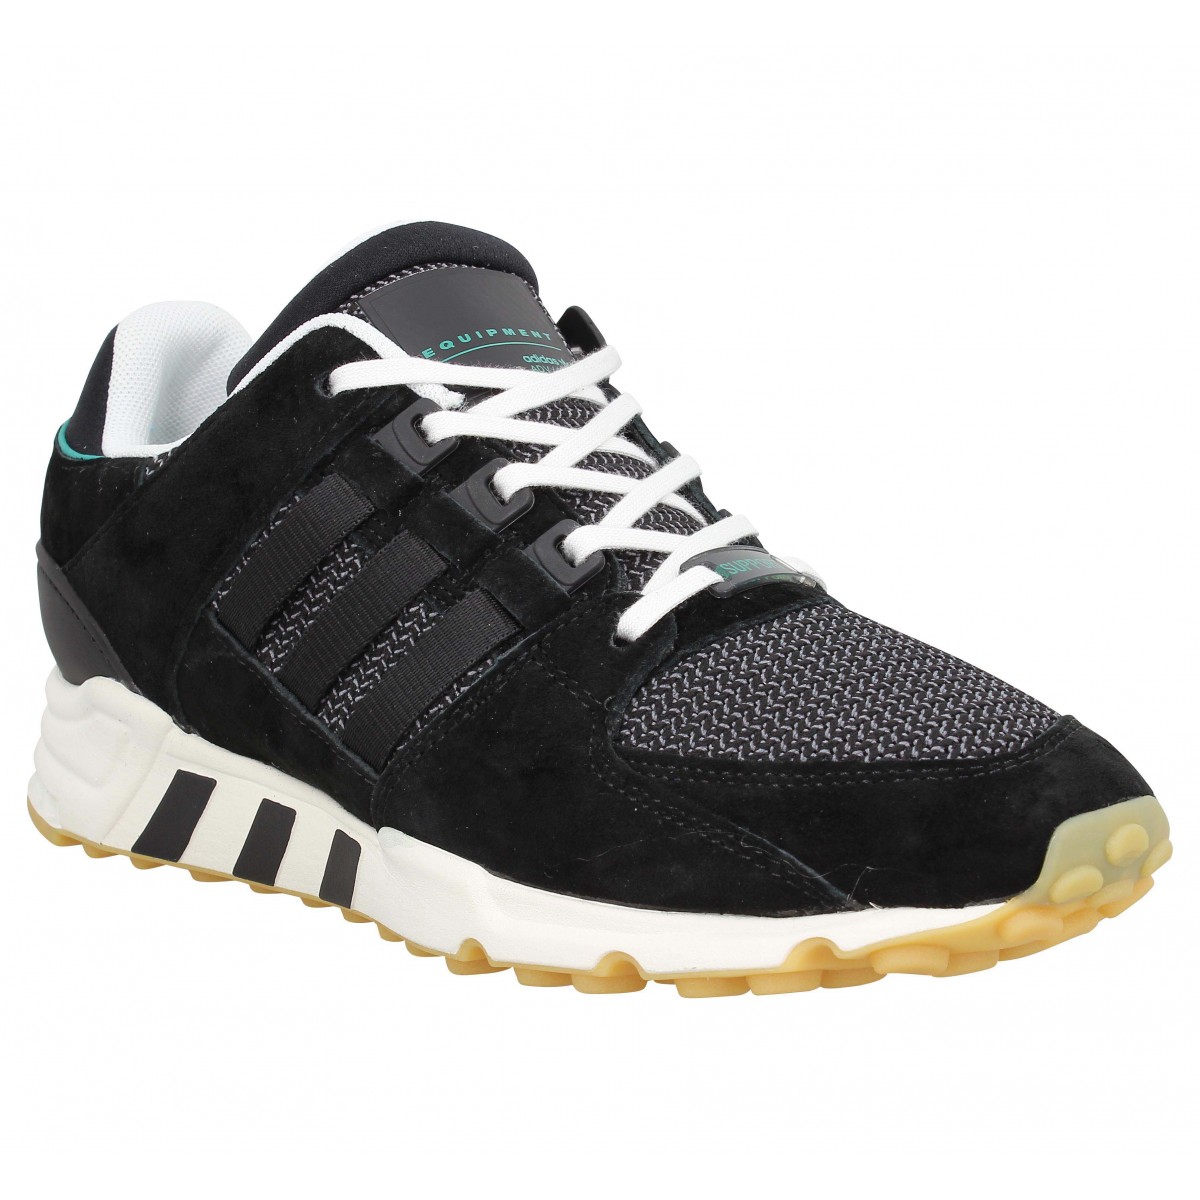 adidas eqt support rf homme france